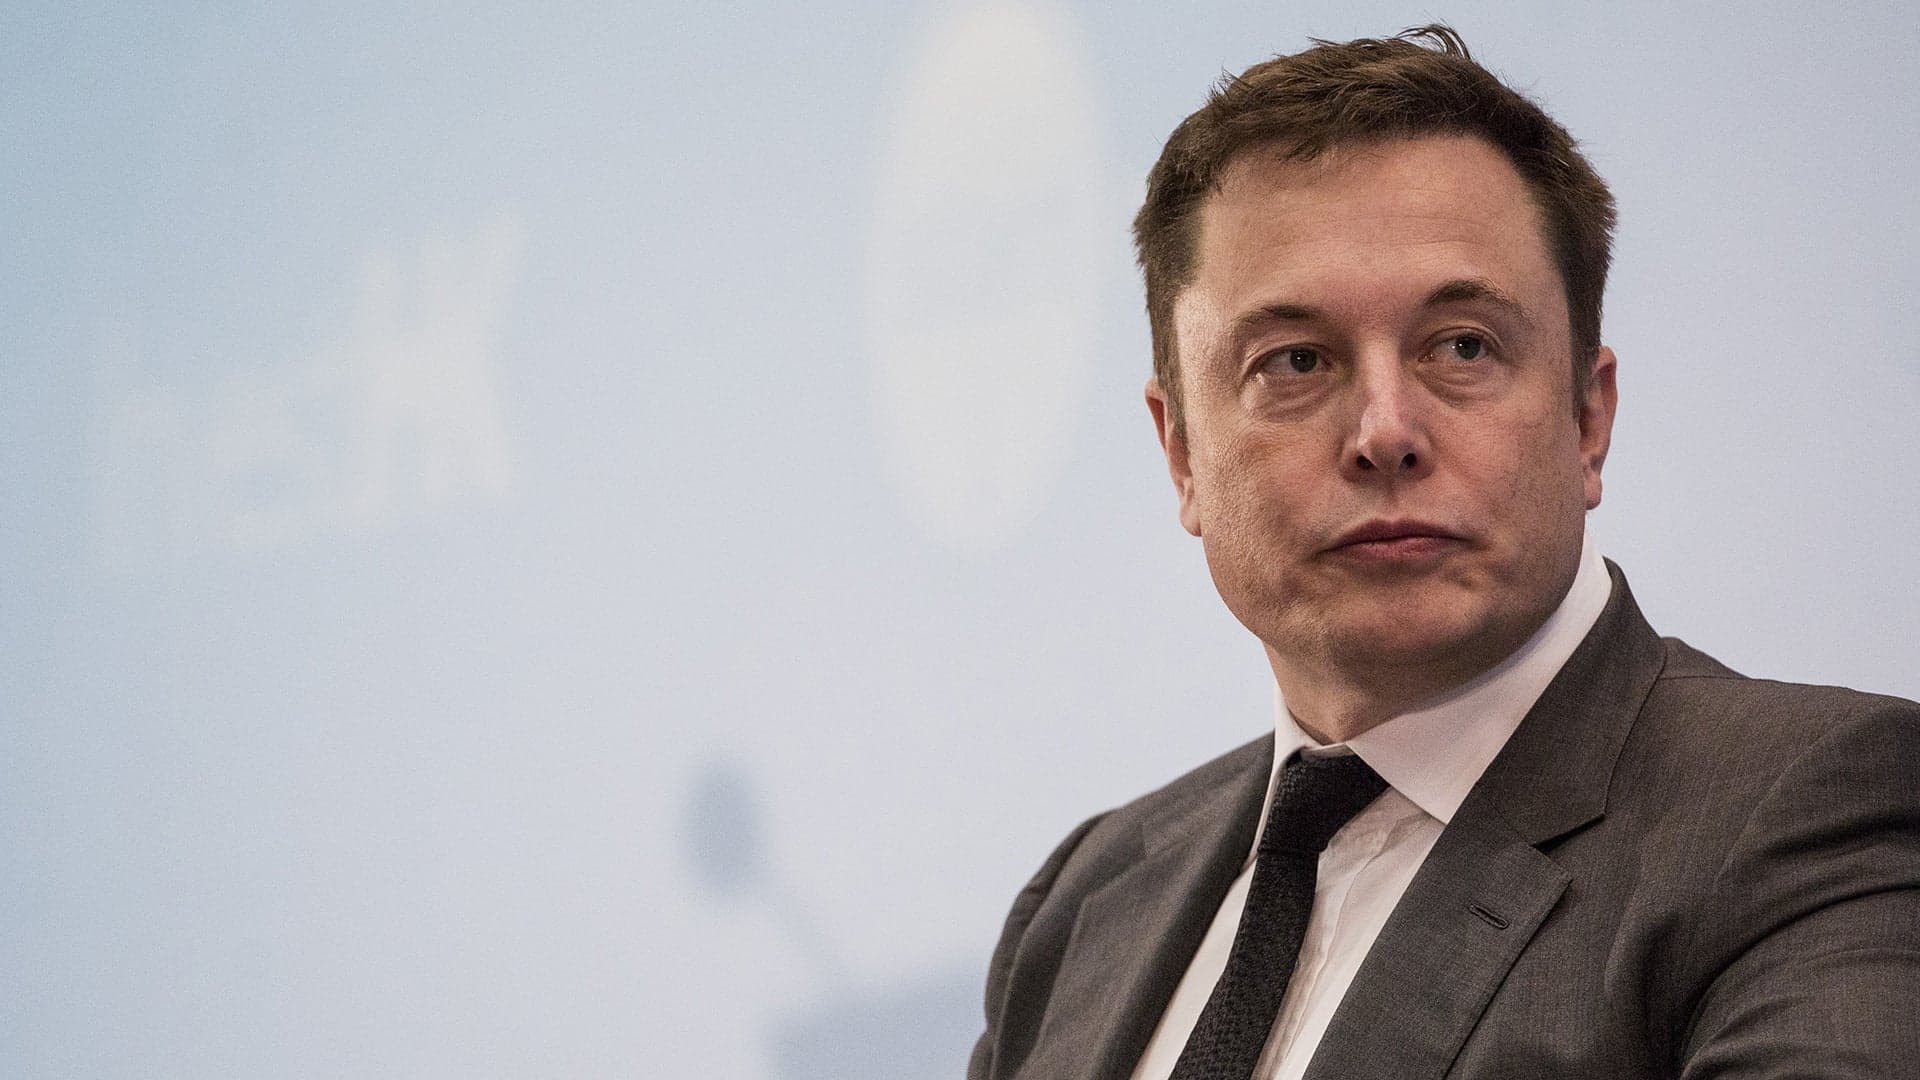 Trial Date Set for Tesla CEO Musk Over ‘Pedo Guy’ Twitter Blast of British Cave Diver